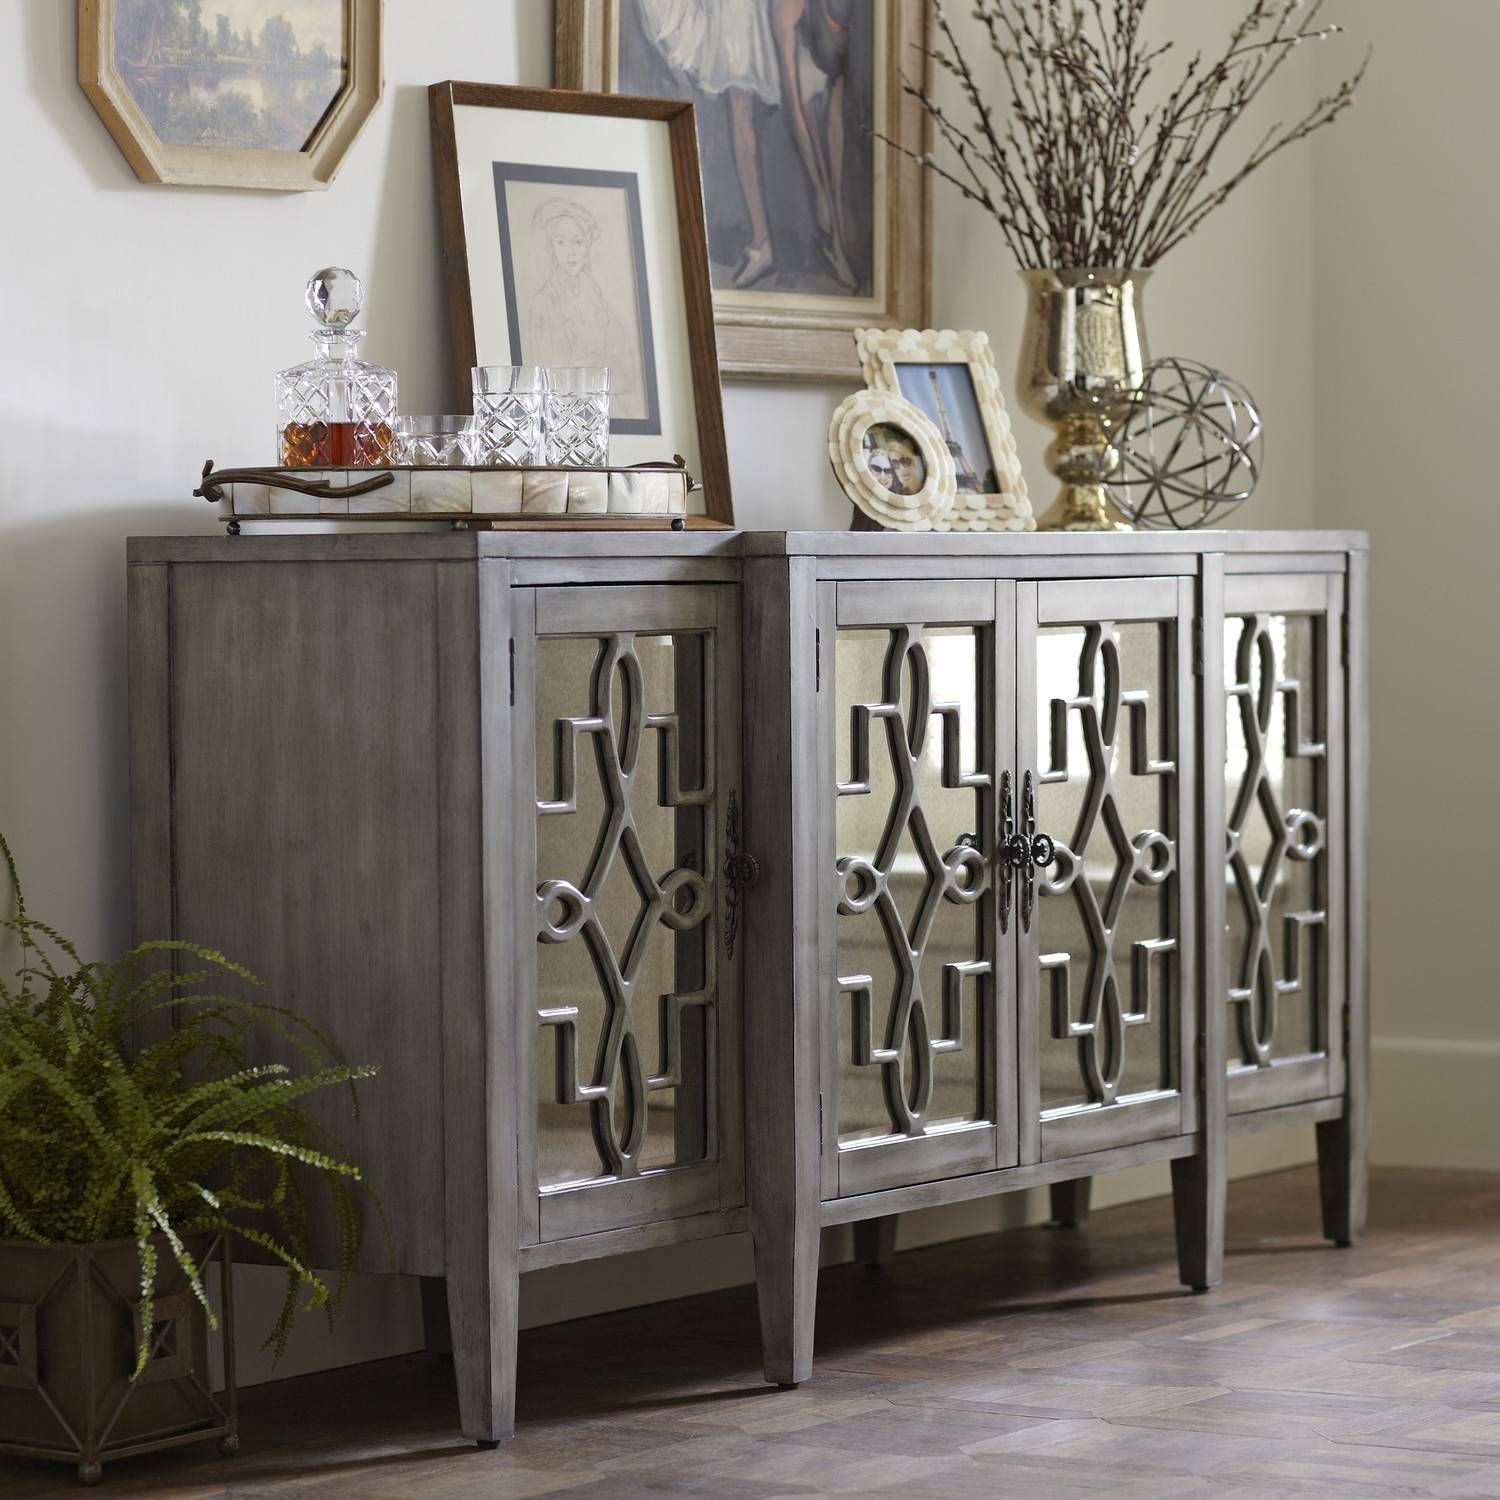 Dining Room : Awesome Dining Room Credenza Buffet Decorating Ideas Pertaining To Best And Newest Credenza Buffet Sideboards (View 8 of 15)